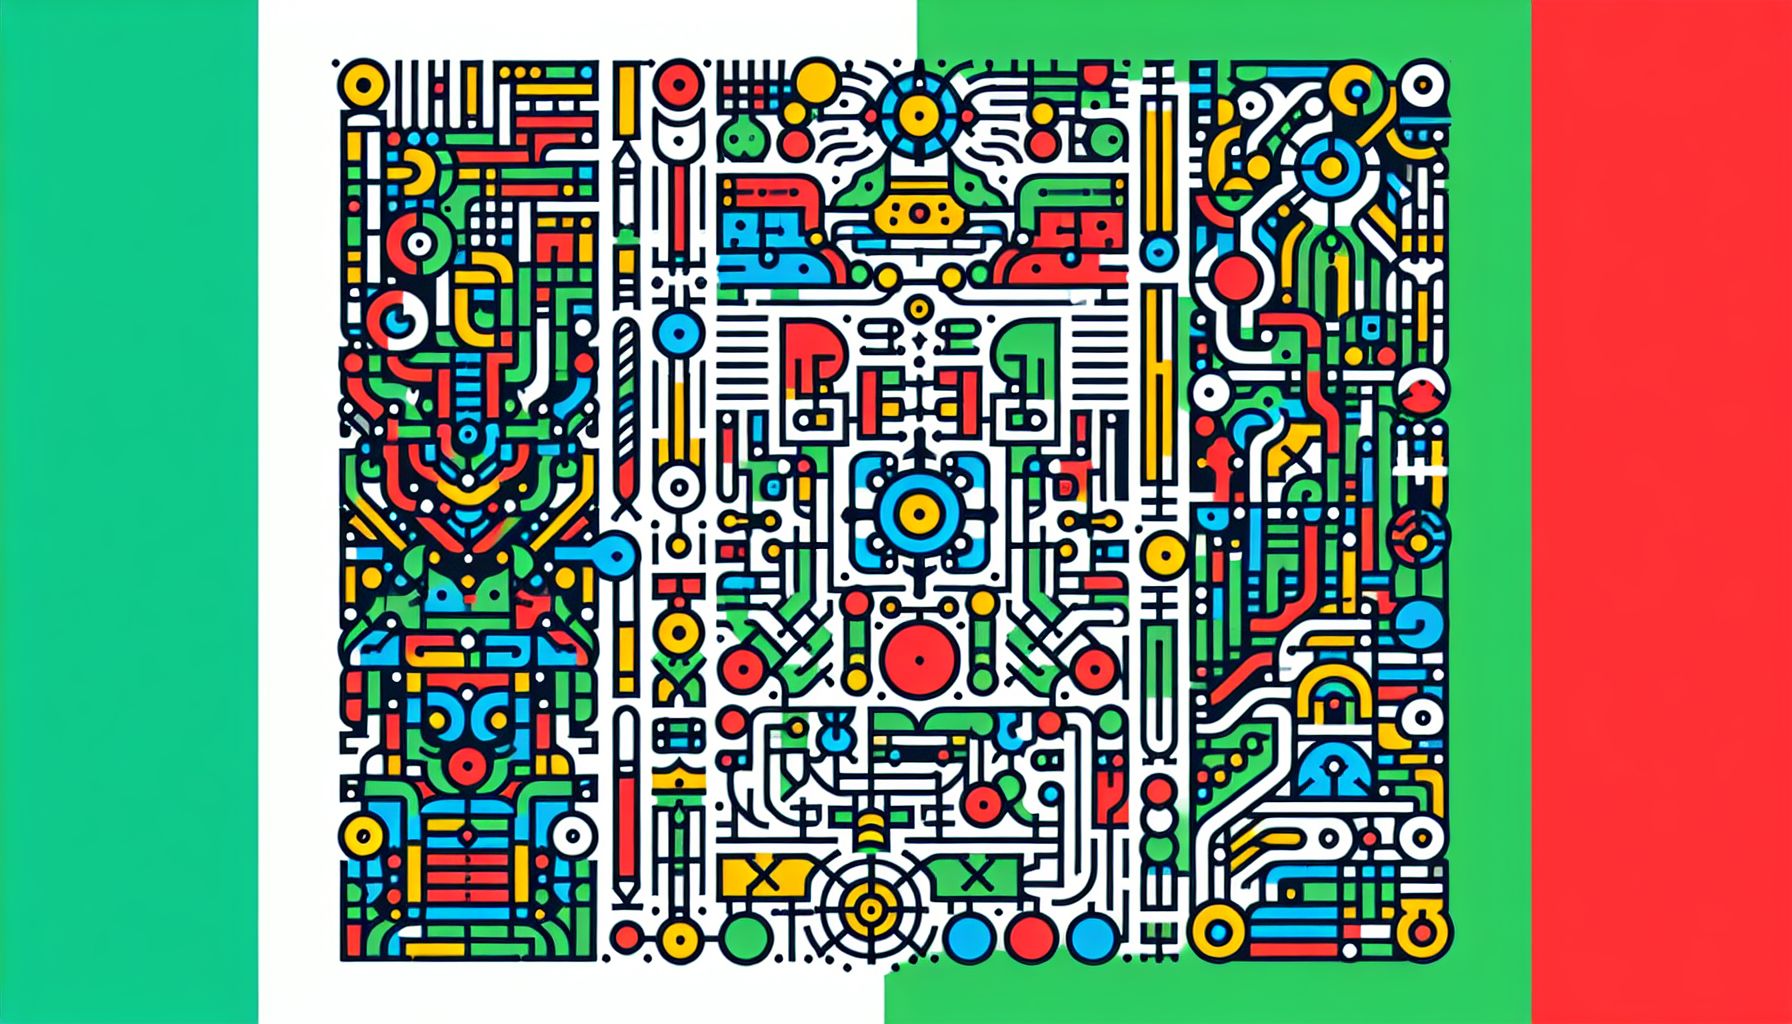 Blueprint in flat illustration style and white background, red #f47574, green #88c7a8, yellow #fcc44b, and blue #645bc8 colors.